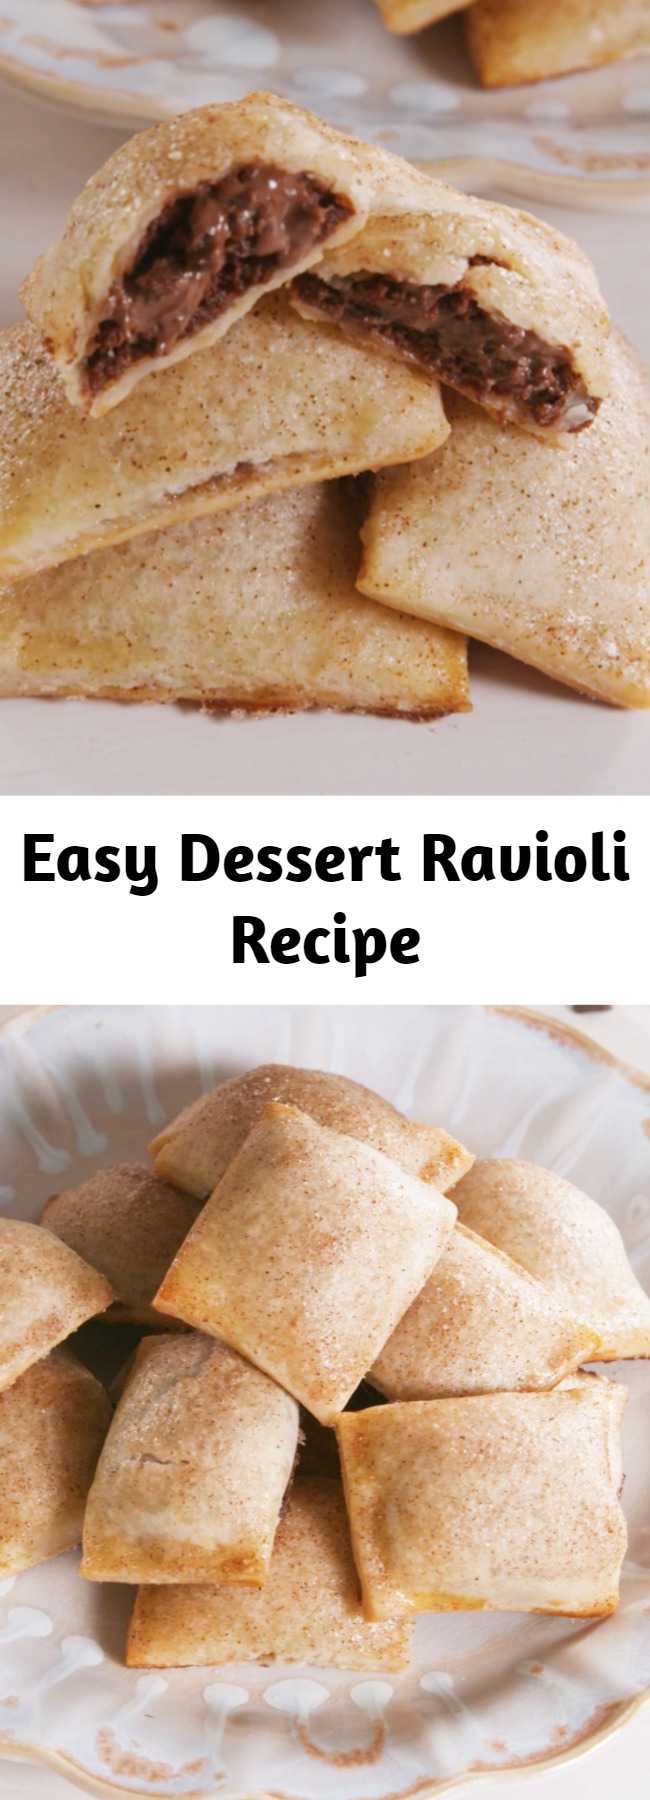 Easy Dessert Ravioli Recipe - How genius is this method?! You can fill these "ravioli" with all sorts of things, from fruit fillings to peanut butter and chocolate. We chose Nutella because we're obsessed with it. This Dessert Ravioli is the BEST thing to do with Nutella. #icecubetrayhacks #piedough #creamcheese #nutella #nutelladesserts #minidesserts